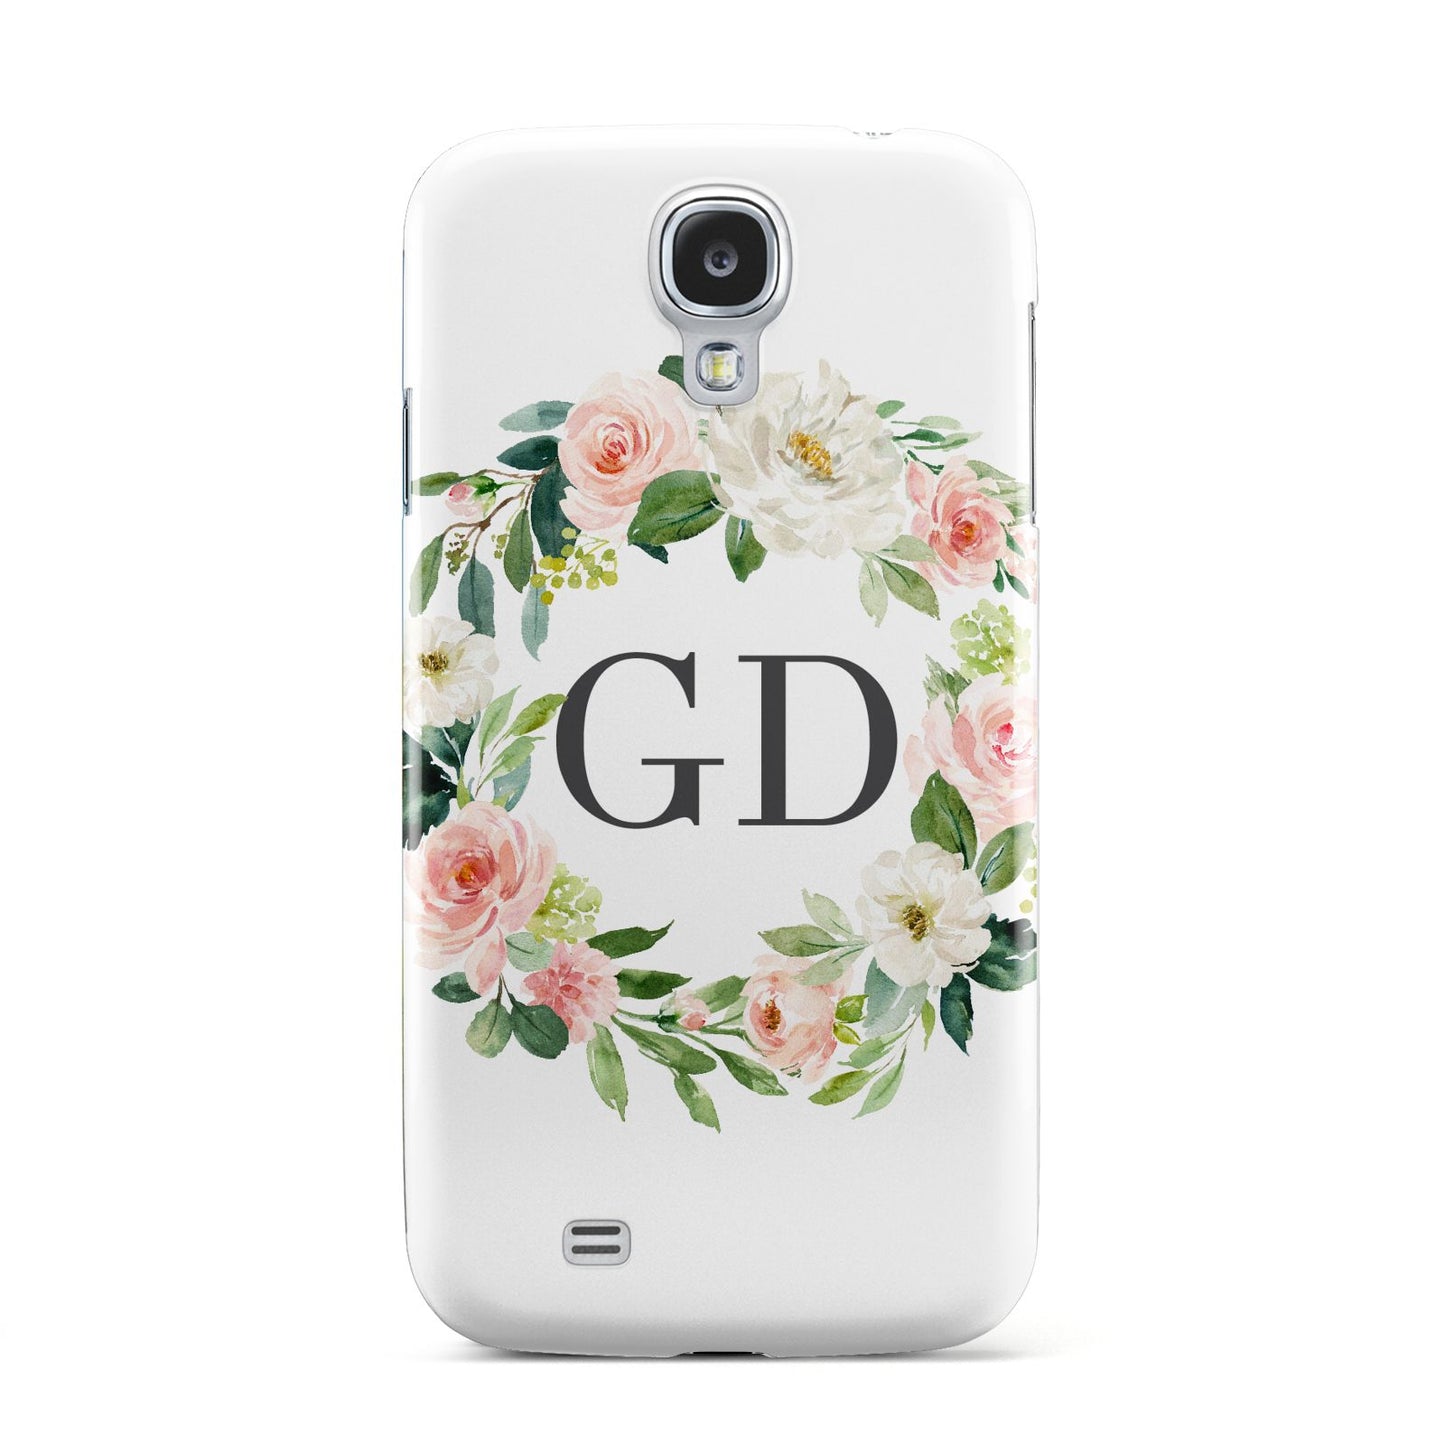 Personalised floral wreath Samsung Galaxy S4 Case